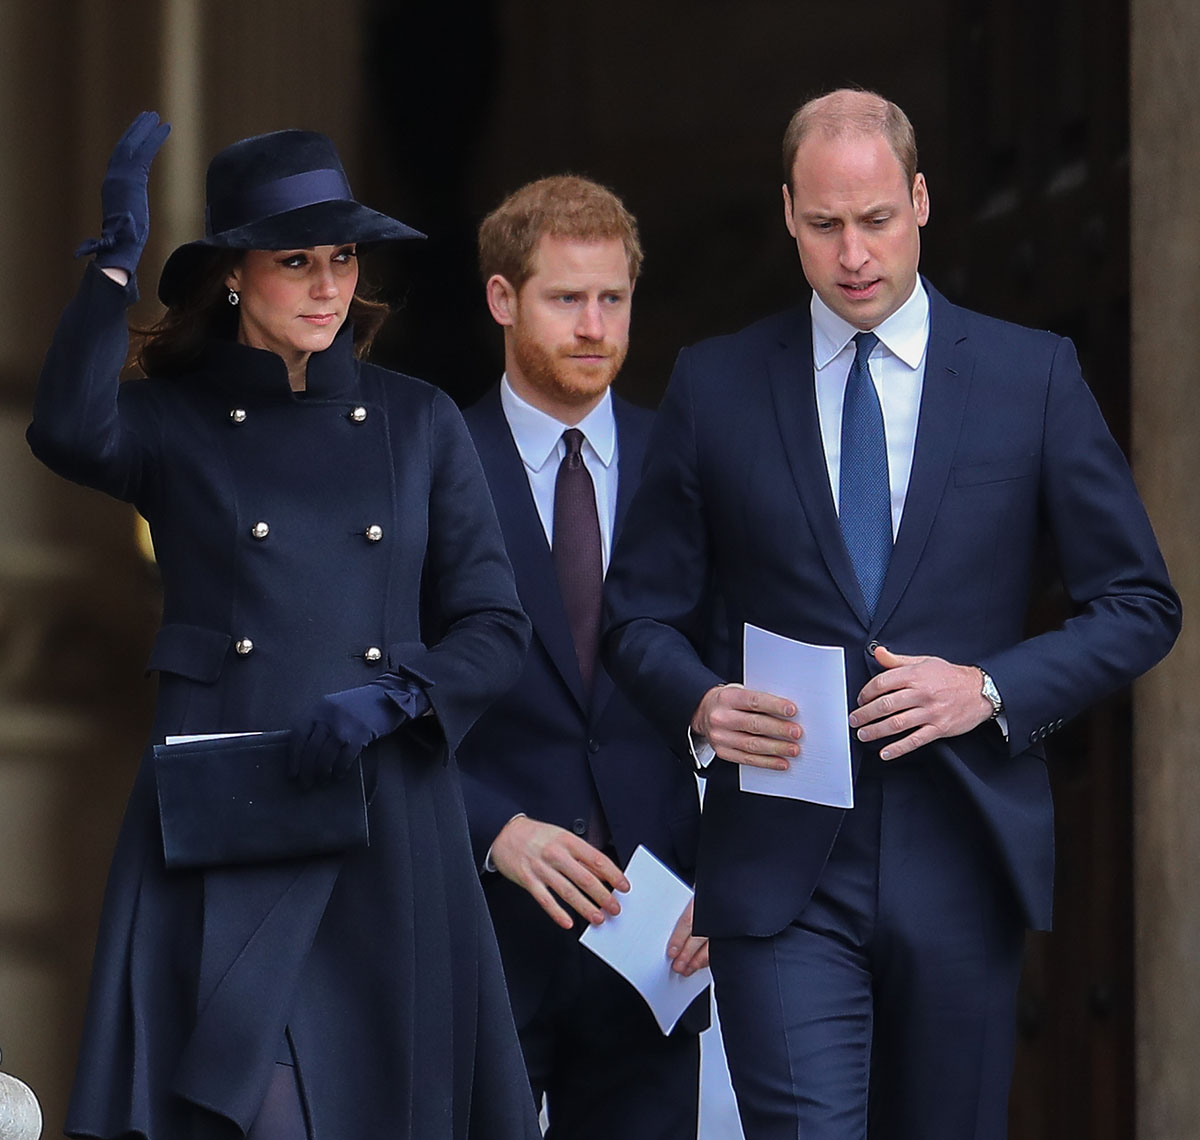 Prince William, Kate Middleton, Prince Harry attend Grenfell Tower National Memorial Service